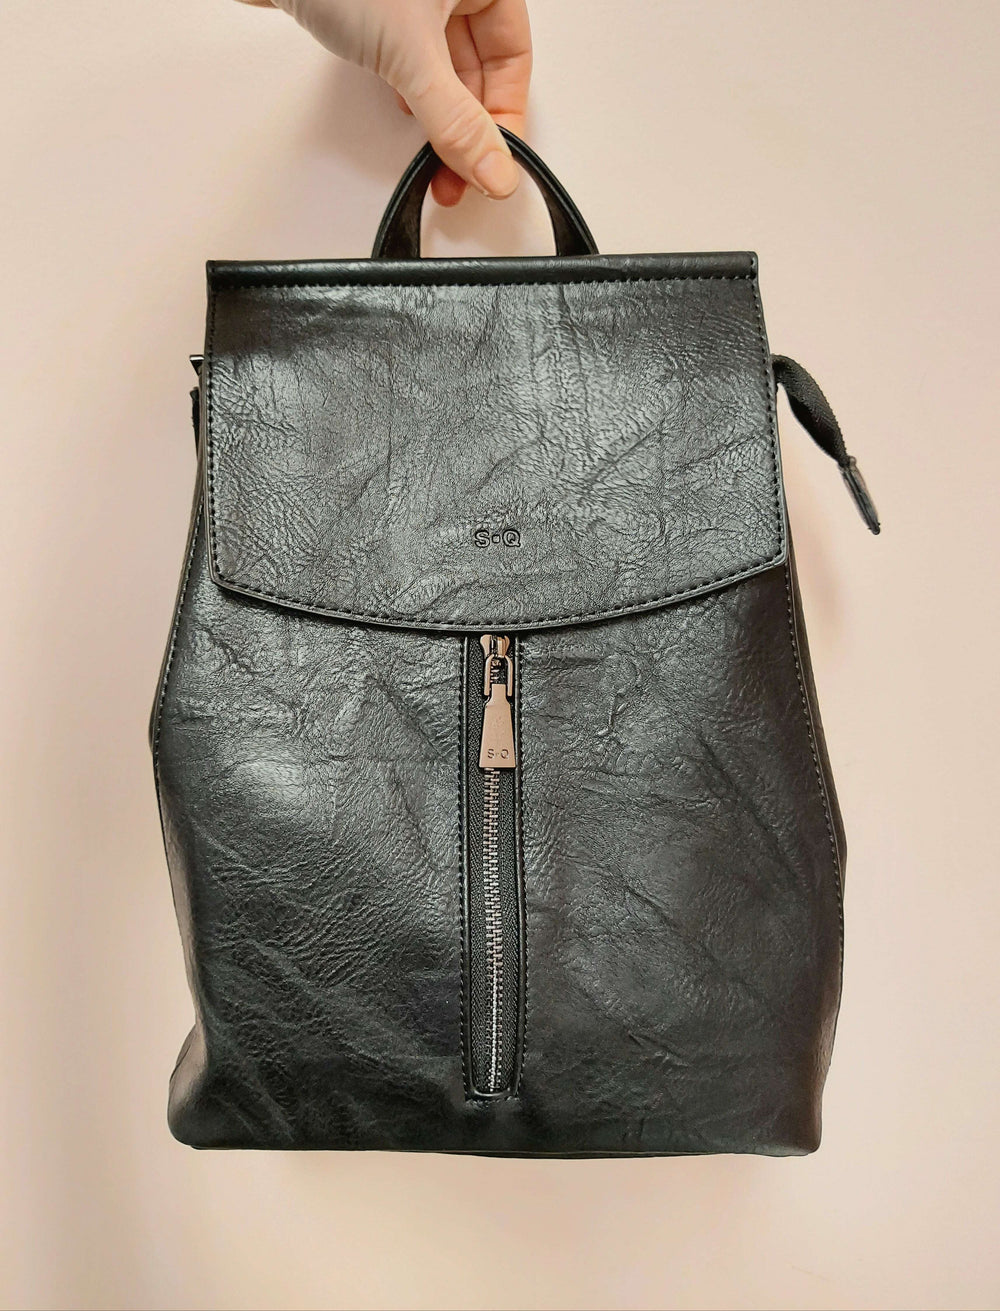 Chloe Leather Convertible Backpack and Crossbody Bag